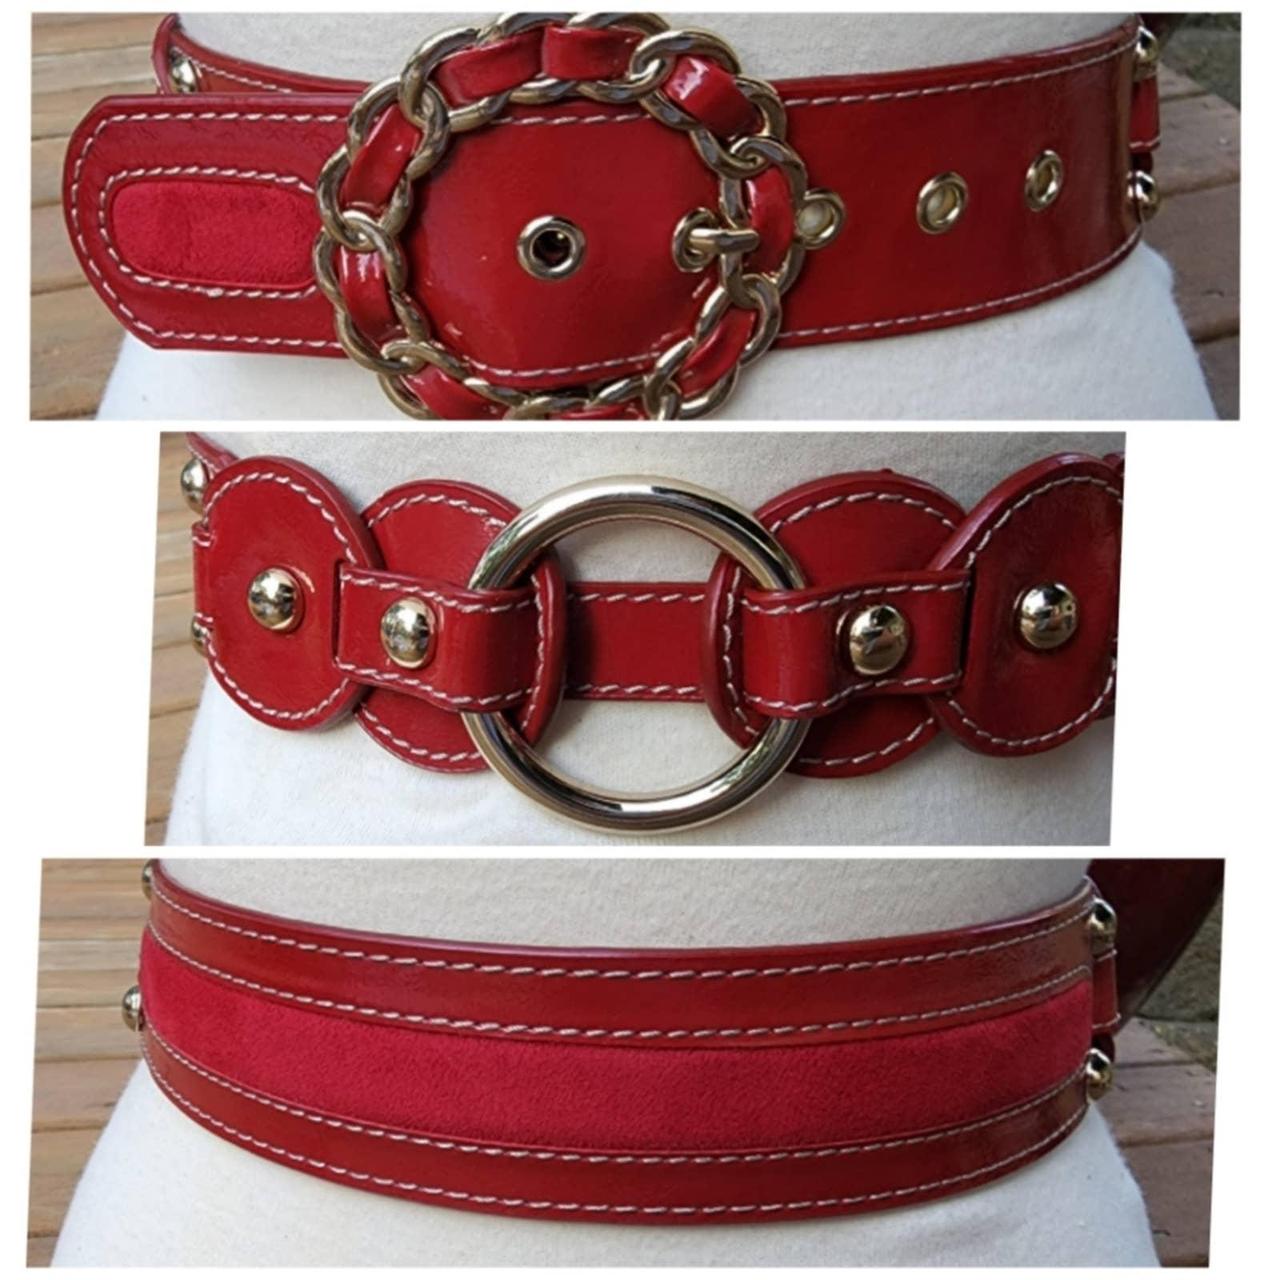 American Vintage Women's Red and Gold Belt